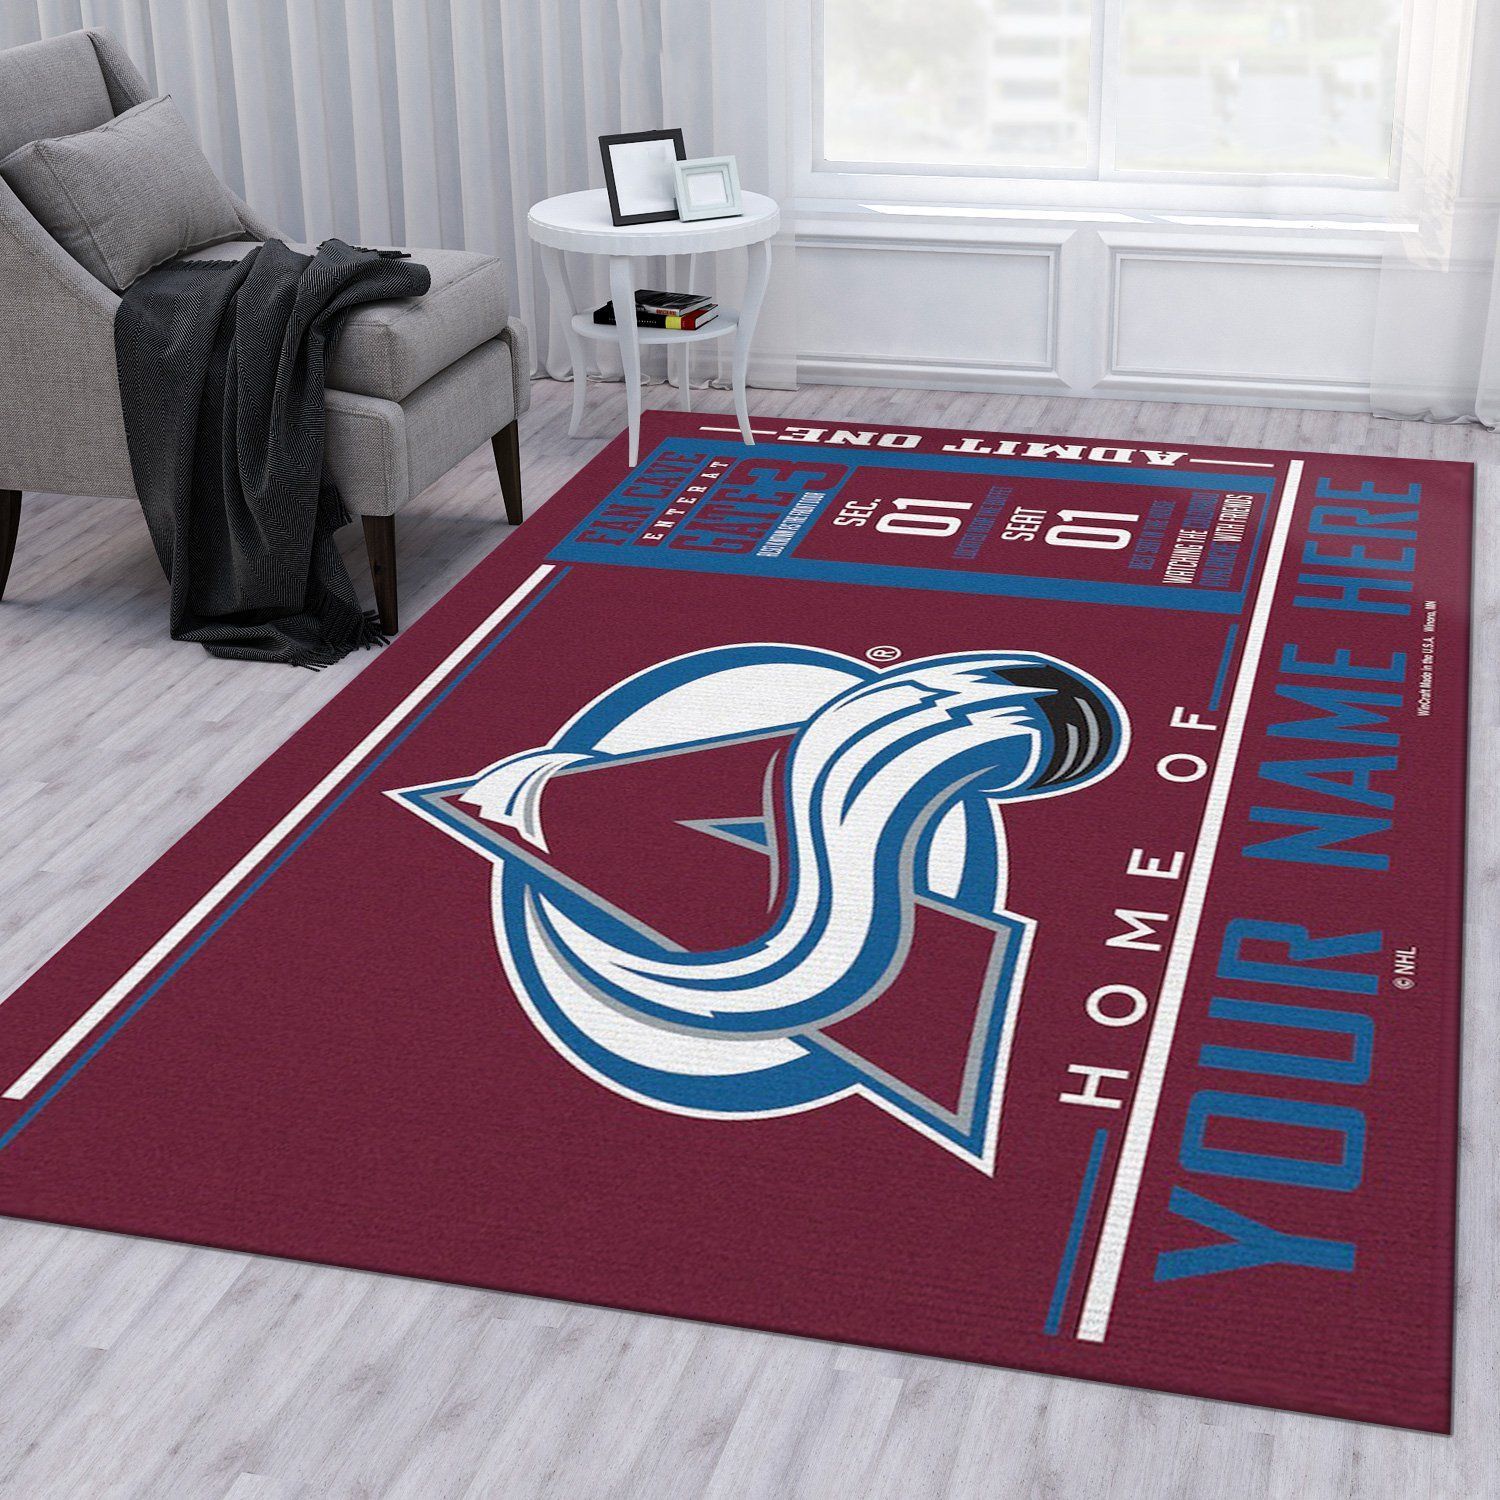 Customizable Colorado Avalanche Wincraft Personalized Nhl Type 7681 Rug Living Room Area Carpet Home Decor